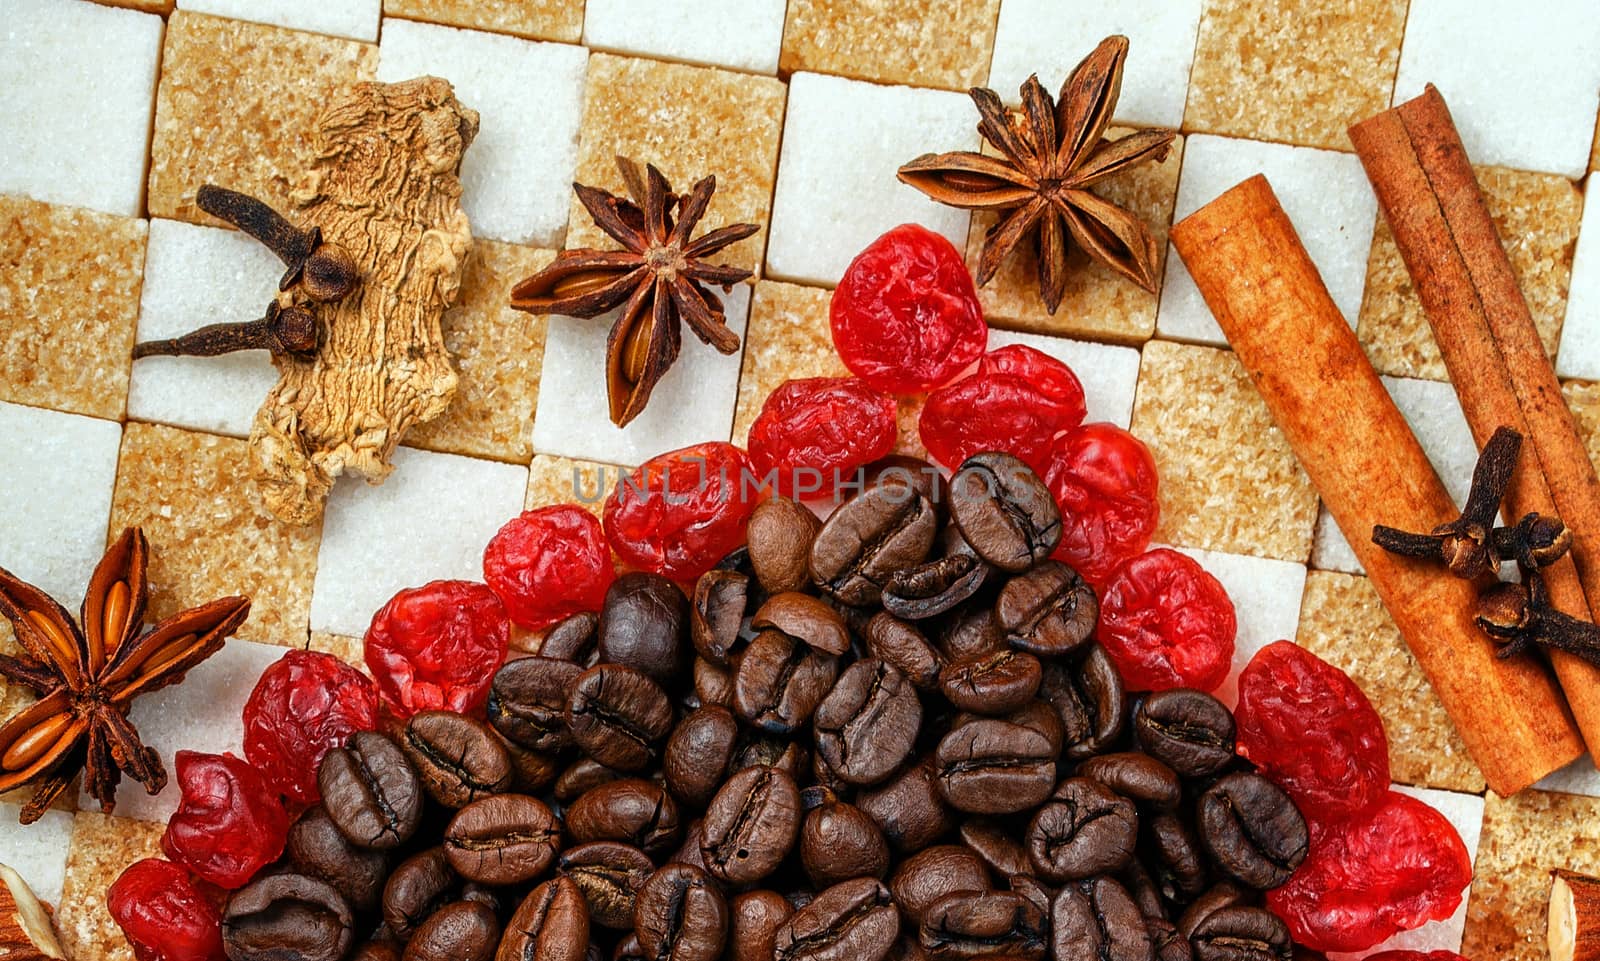 Sweets, spices and coffee beans laid out on a background of refined sugar